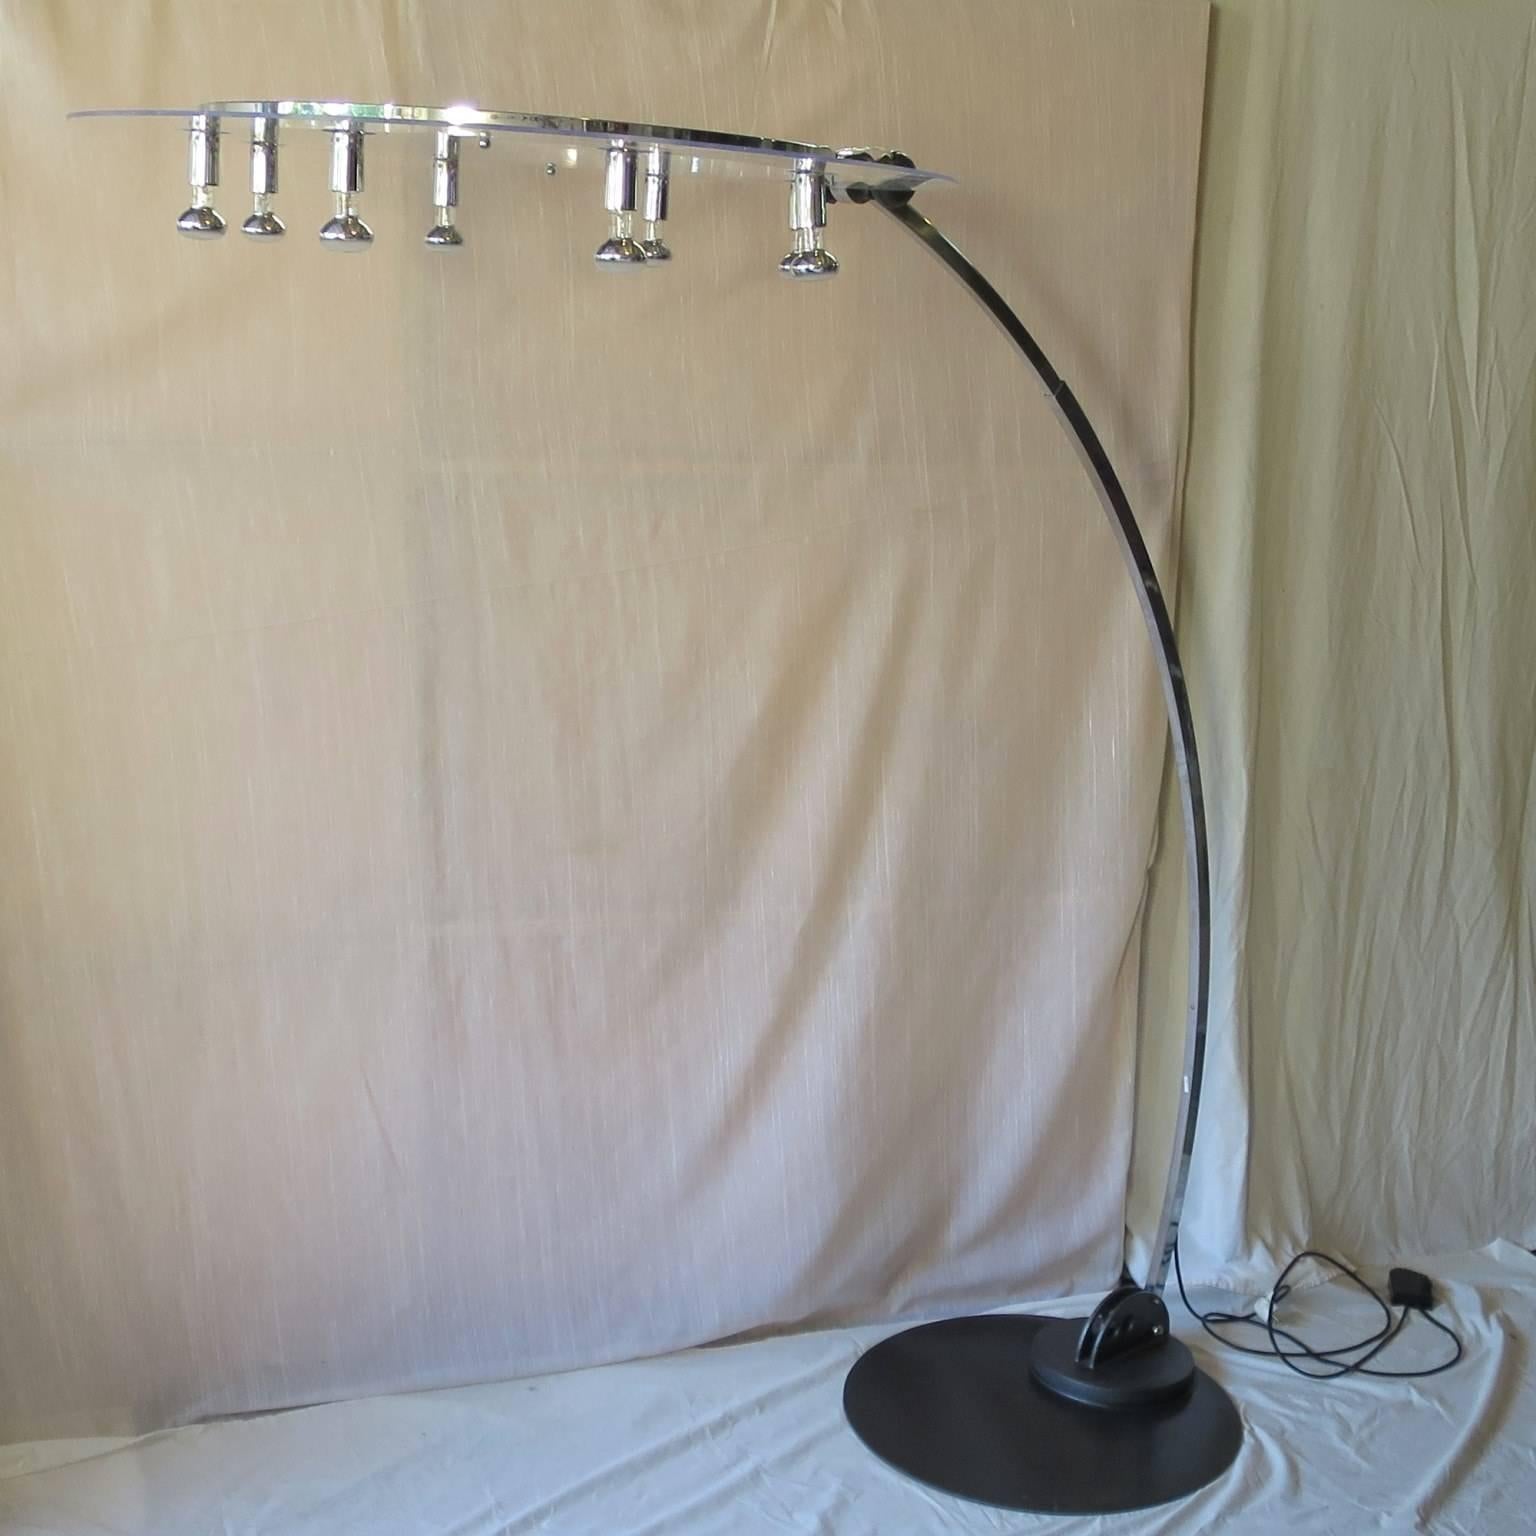 Chrome and Lucite elegant curved design floor lamp .
Eight bulbs around the top Lucite circle, very good lightening .
Wired for USA.
Iron base diameter 24